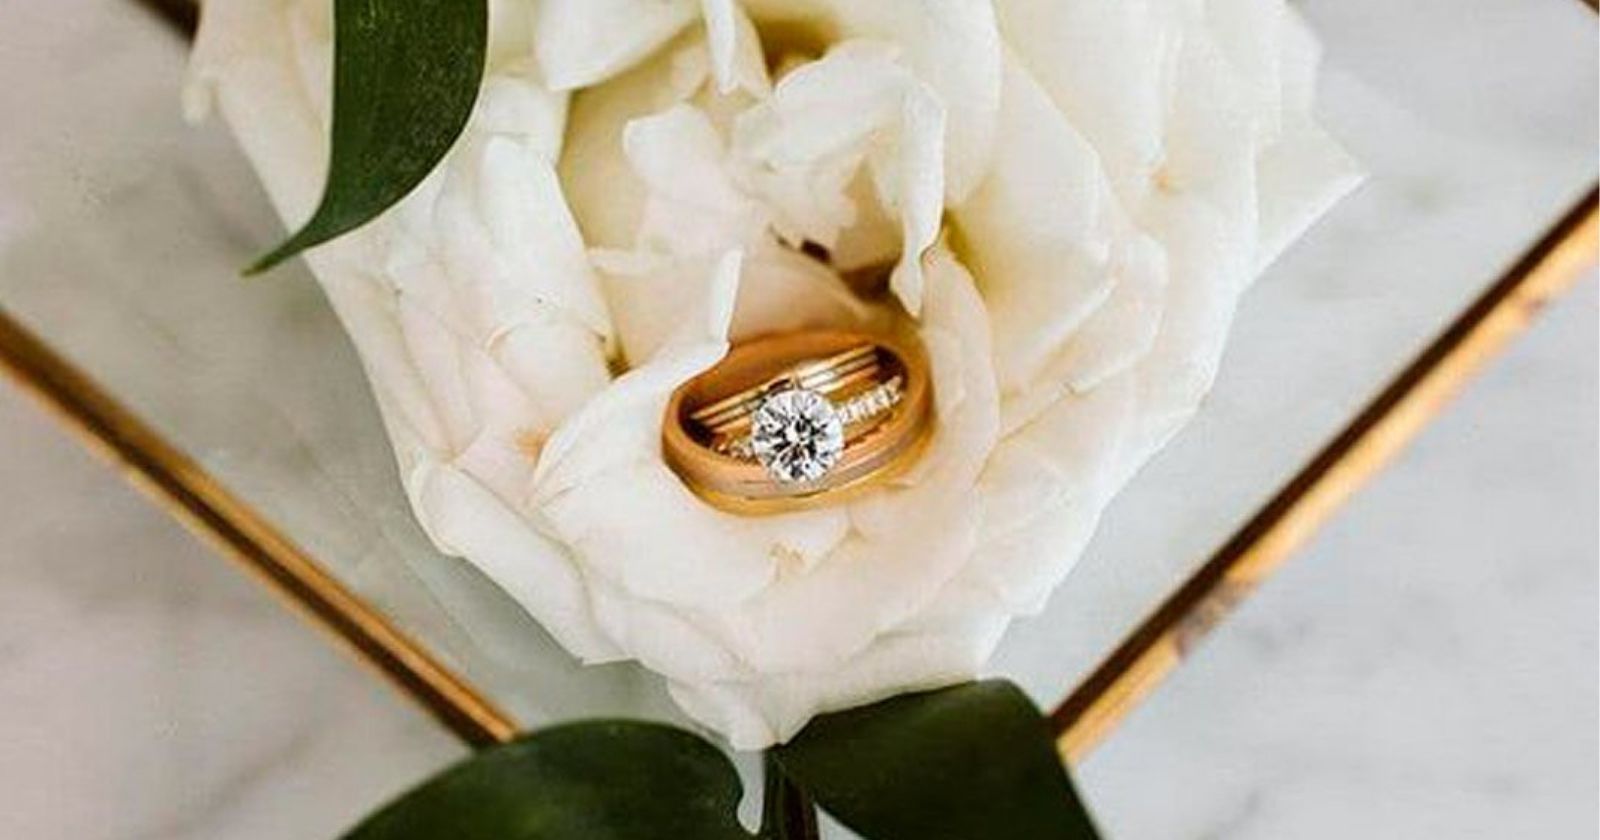 The Average Price Of Wedding Ring: How Much To Spend?